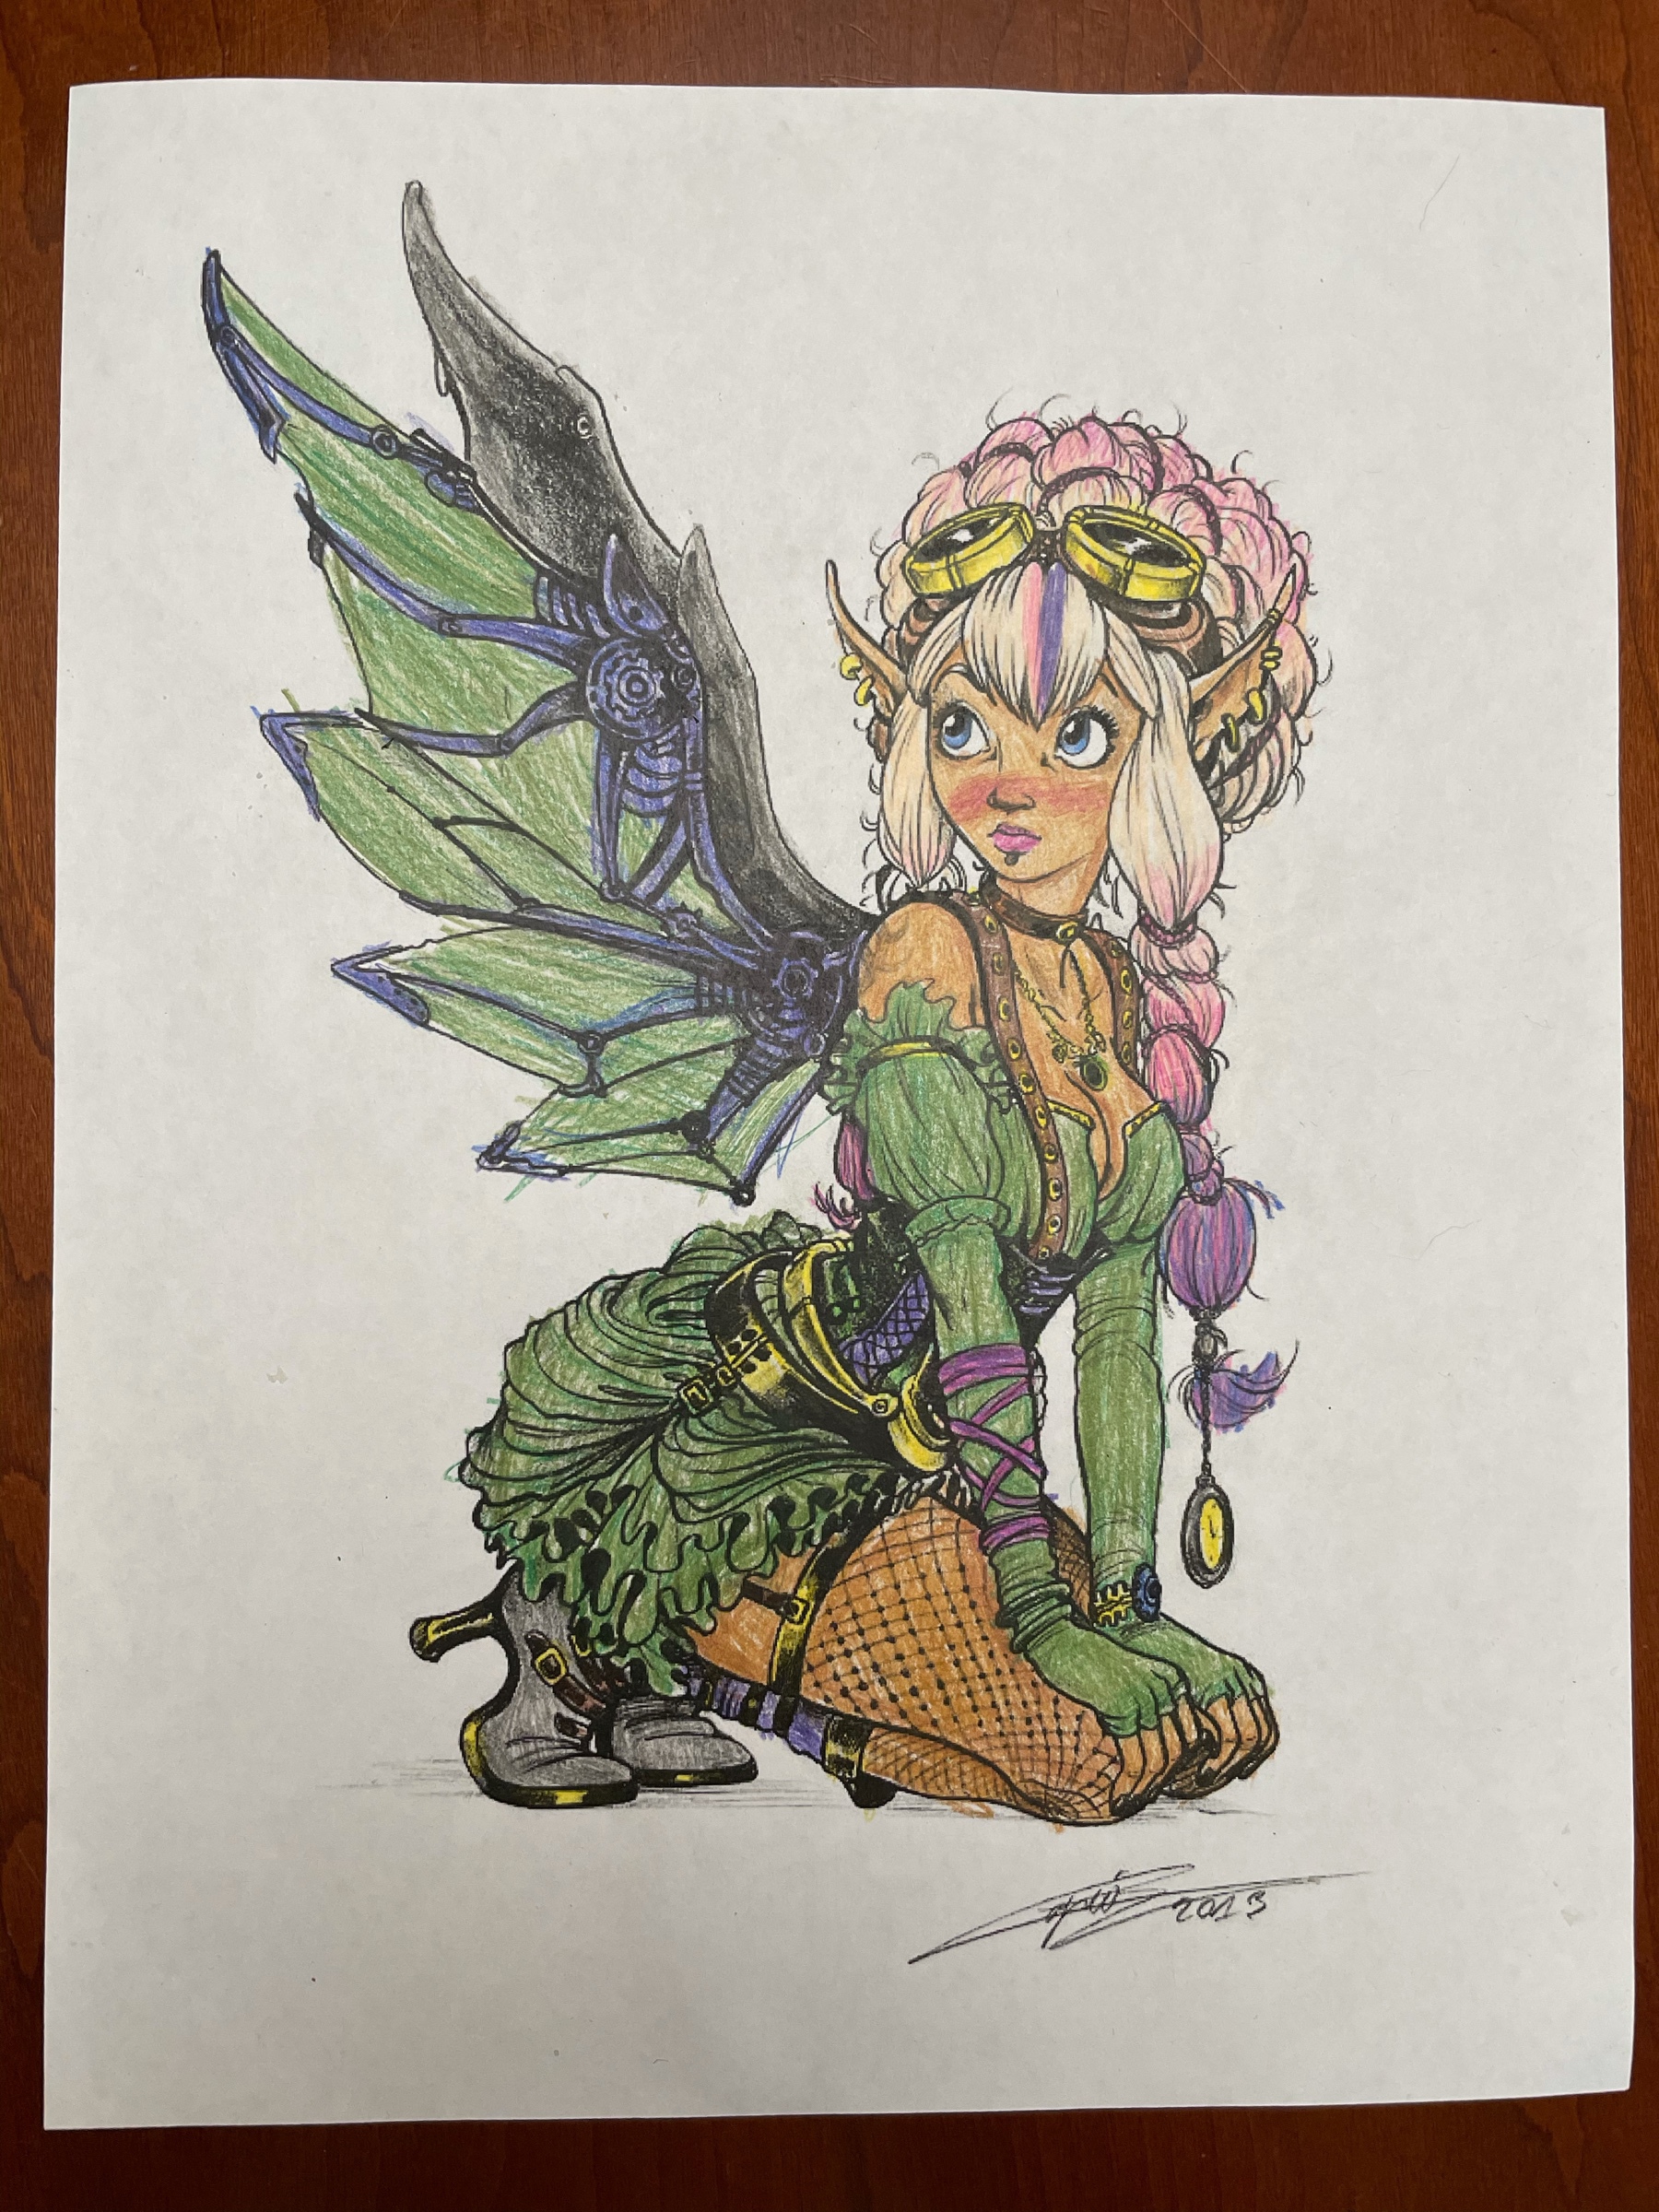 Cyberpunk "fairy" in green with pink and white hair